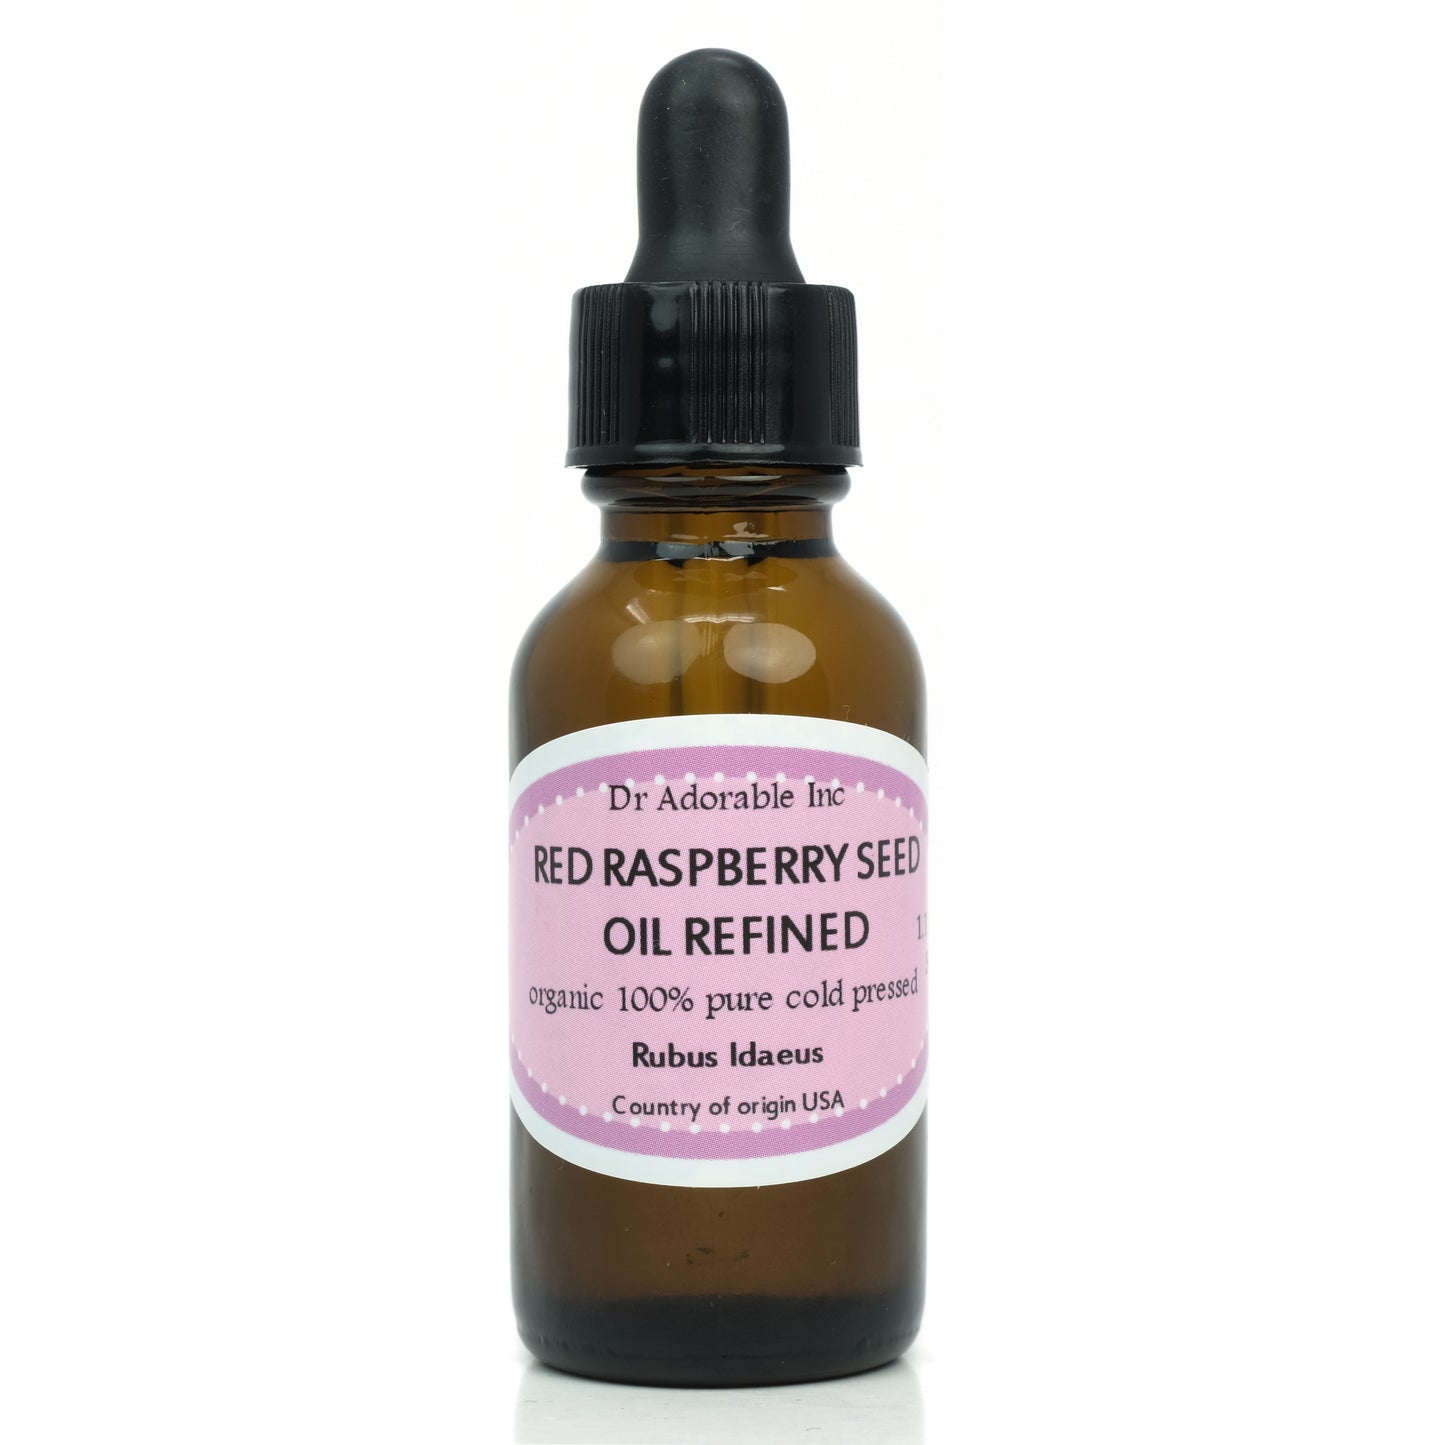 Red Raspberry Seed Refined Oil - 100% Pure Natural Organic Cold Pressed